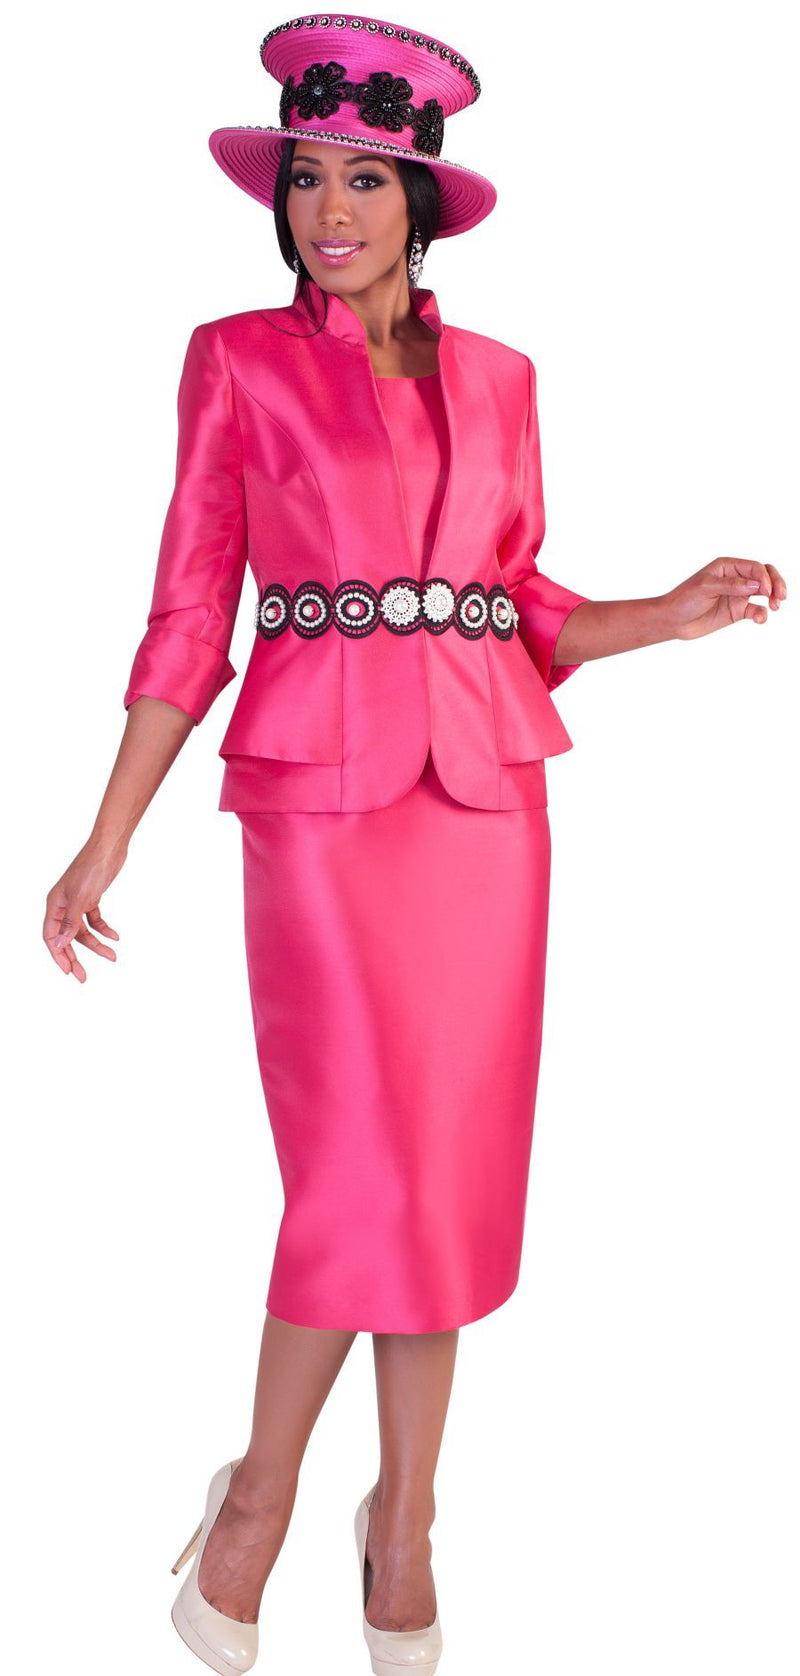 Tally Taylor Suit 4617-Fuchsia/Black - Church Suits For Less